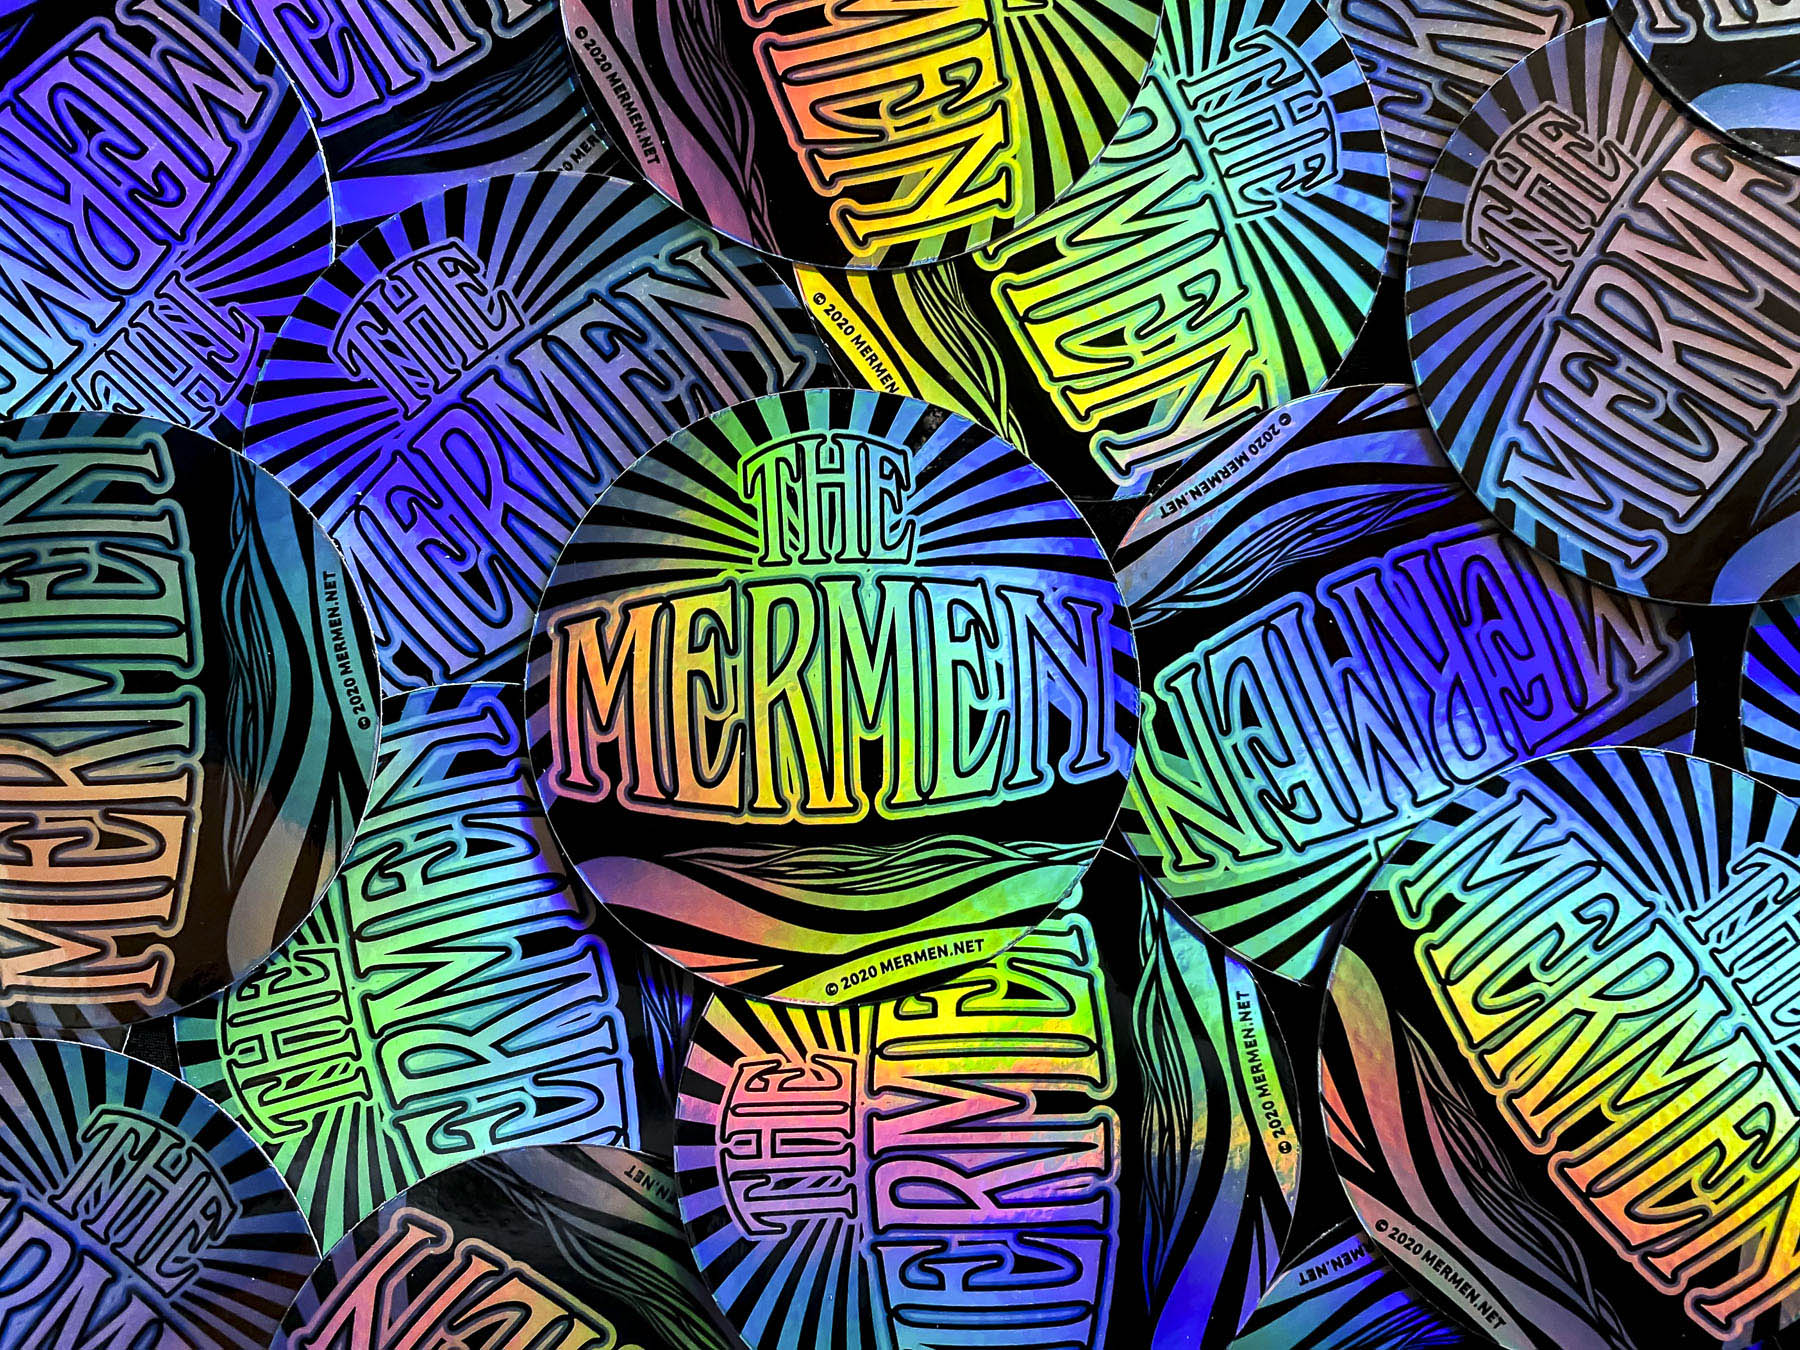 The Mermen Holographic Stickers. Sticker design and photo by emi